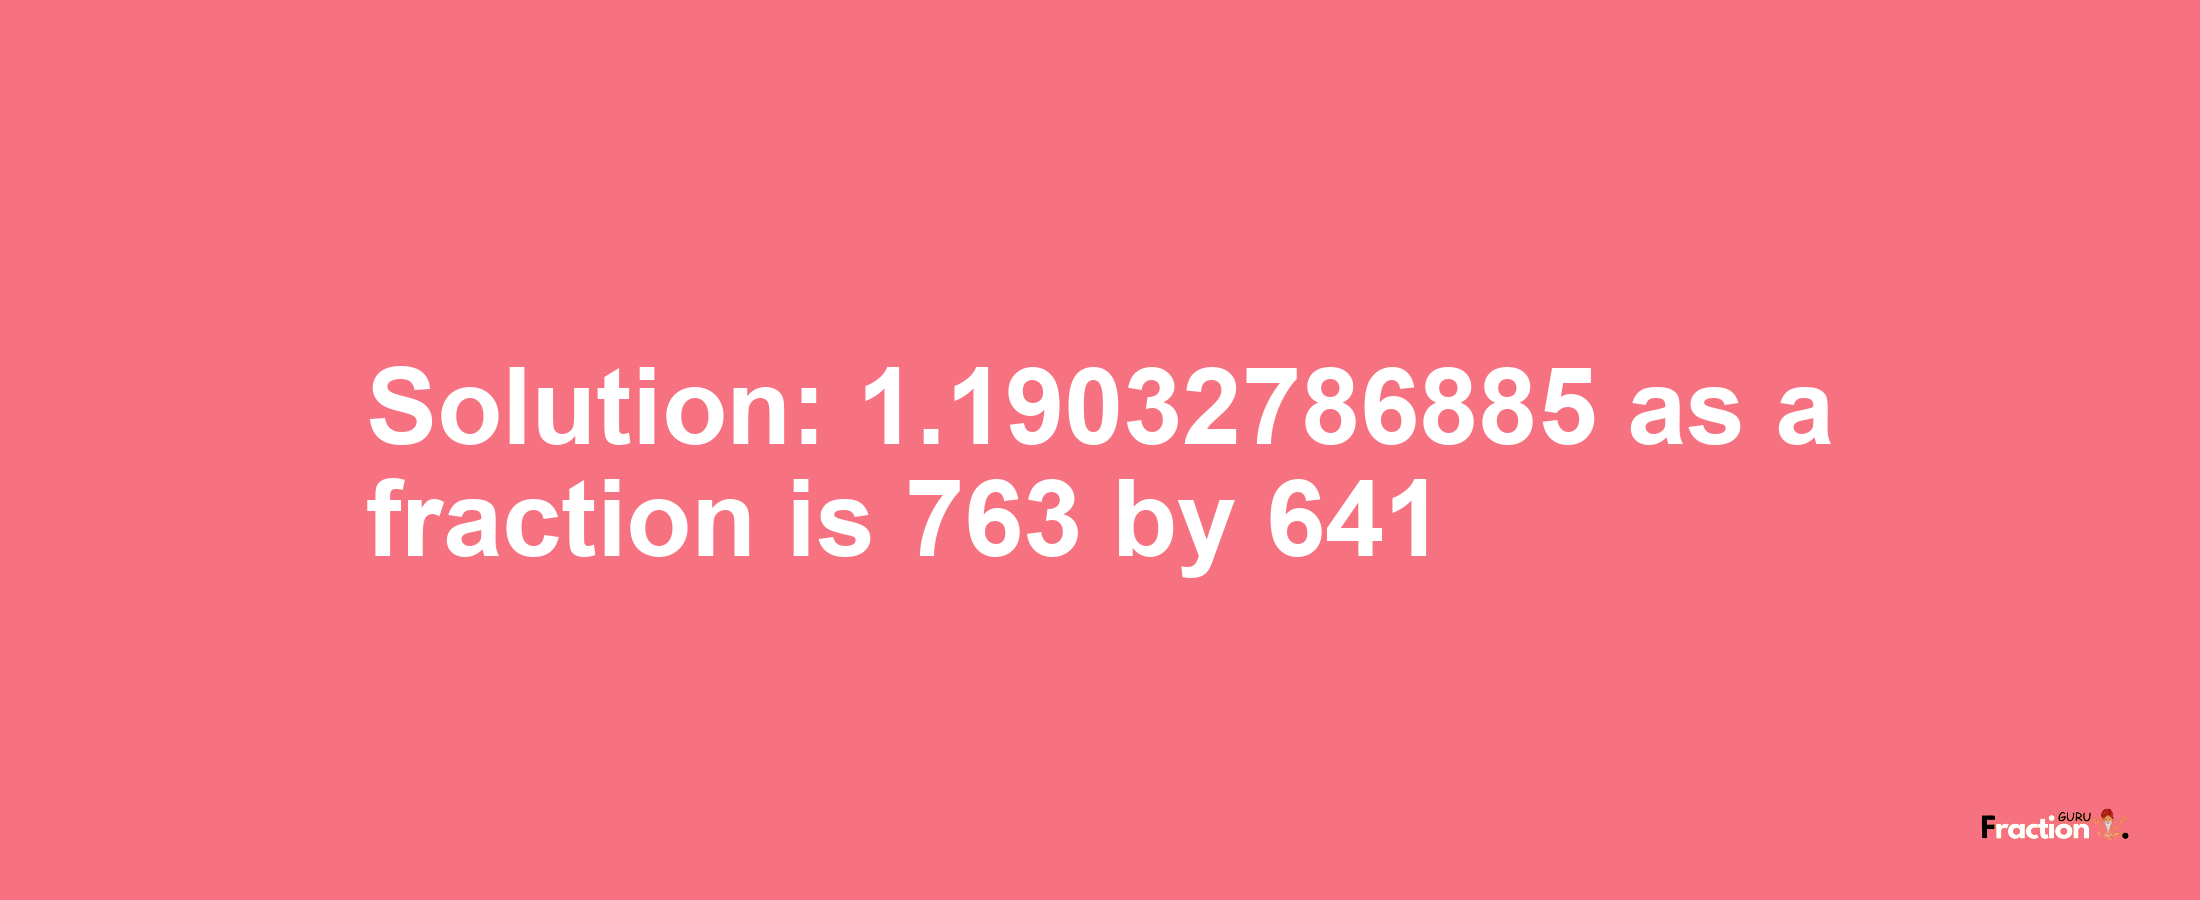 Solution:1.19032786885 as a fraction is 763/641